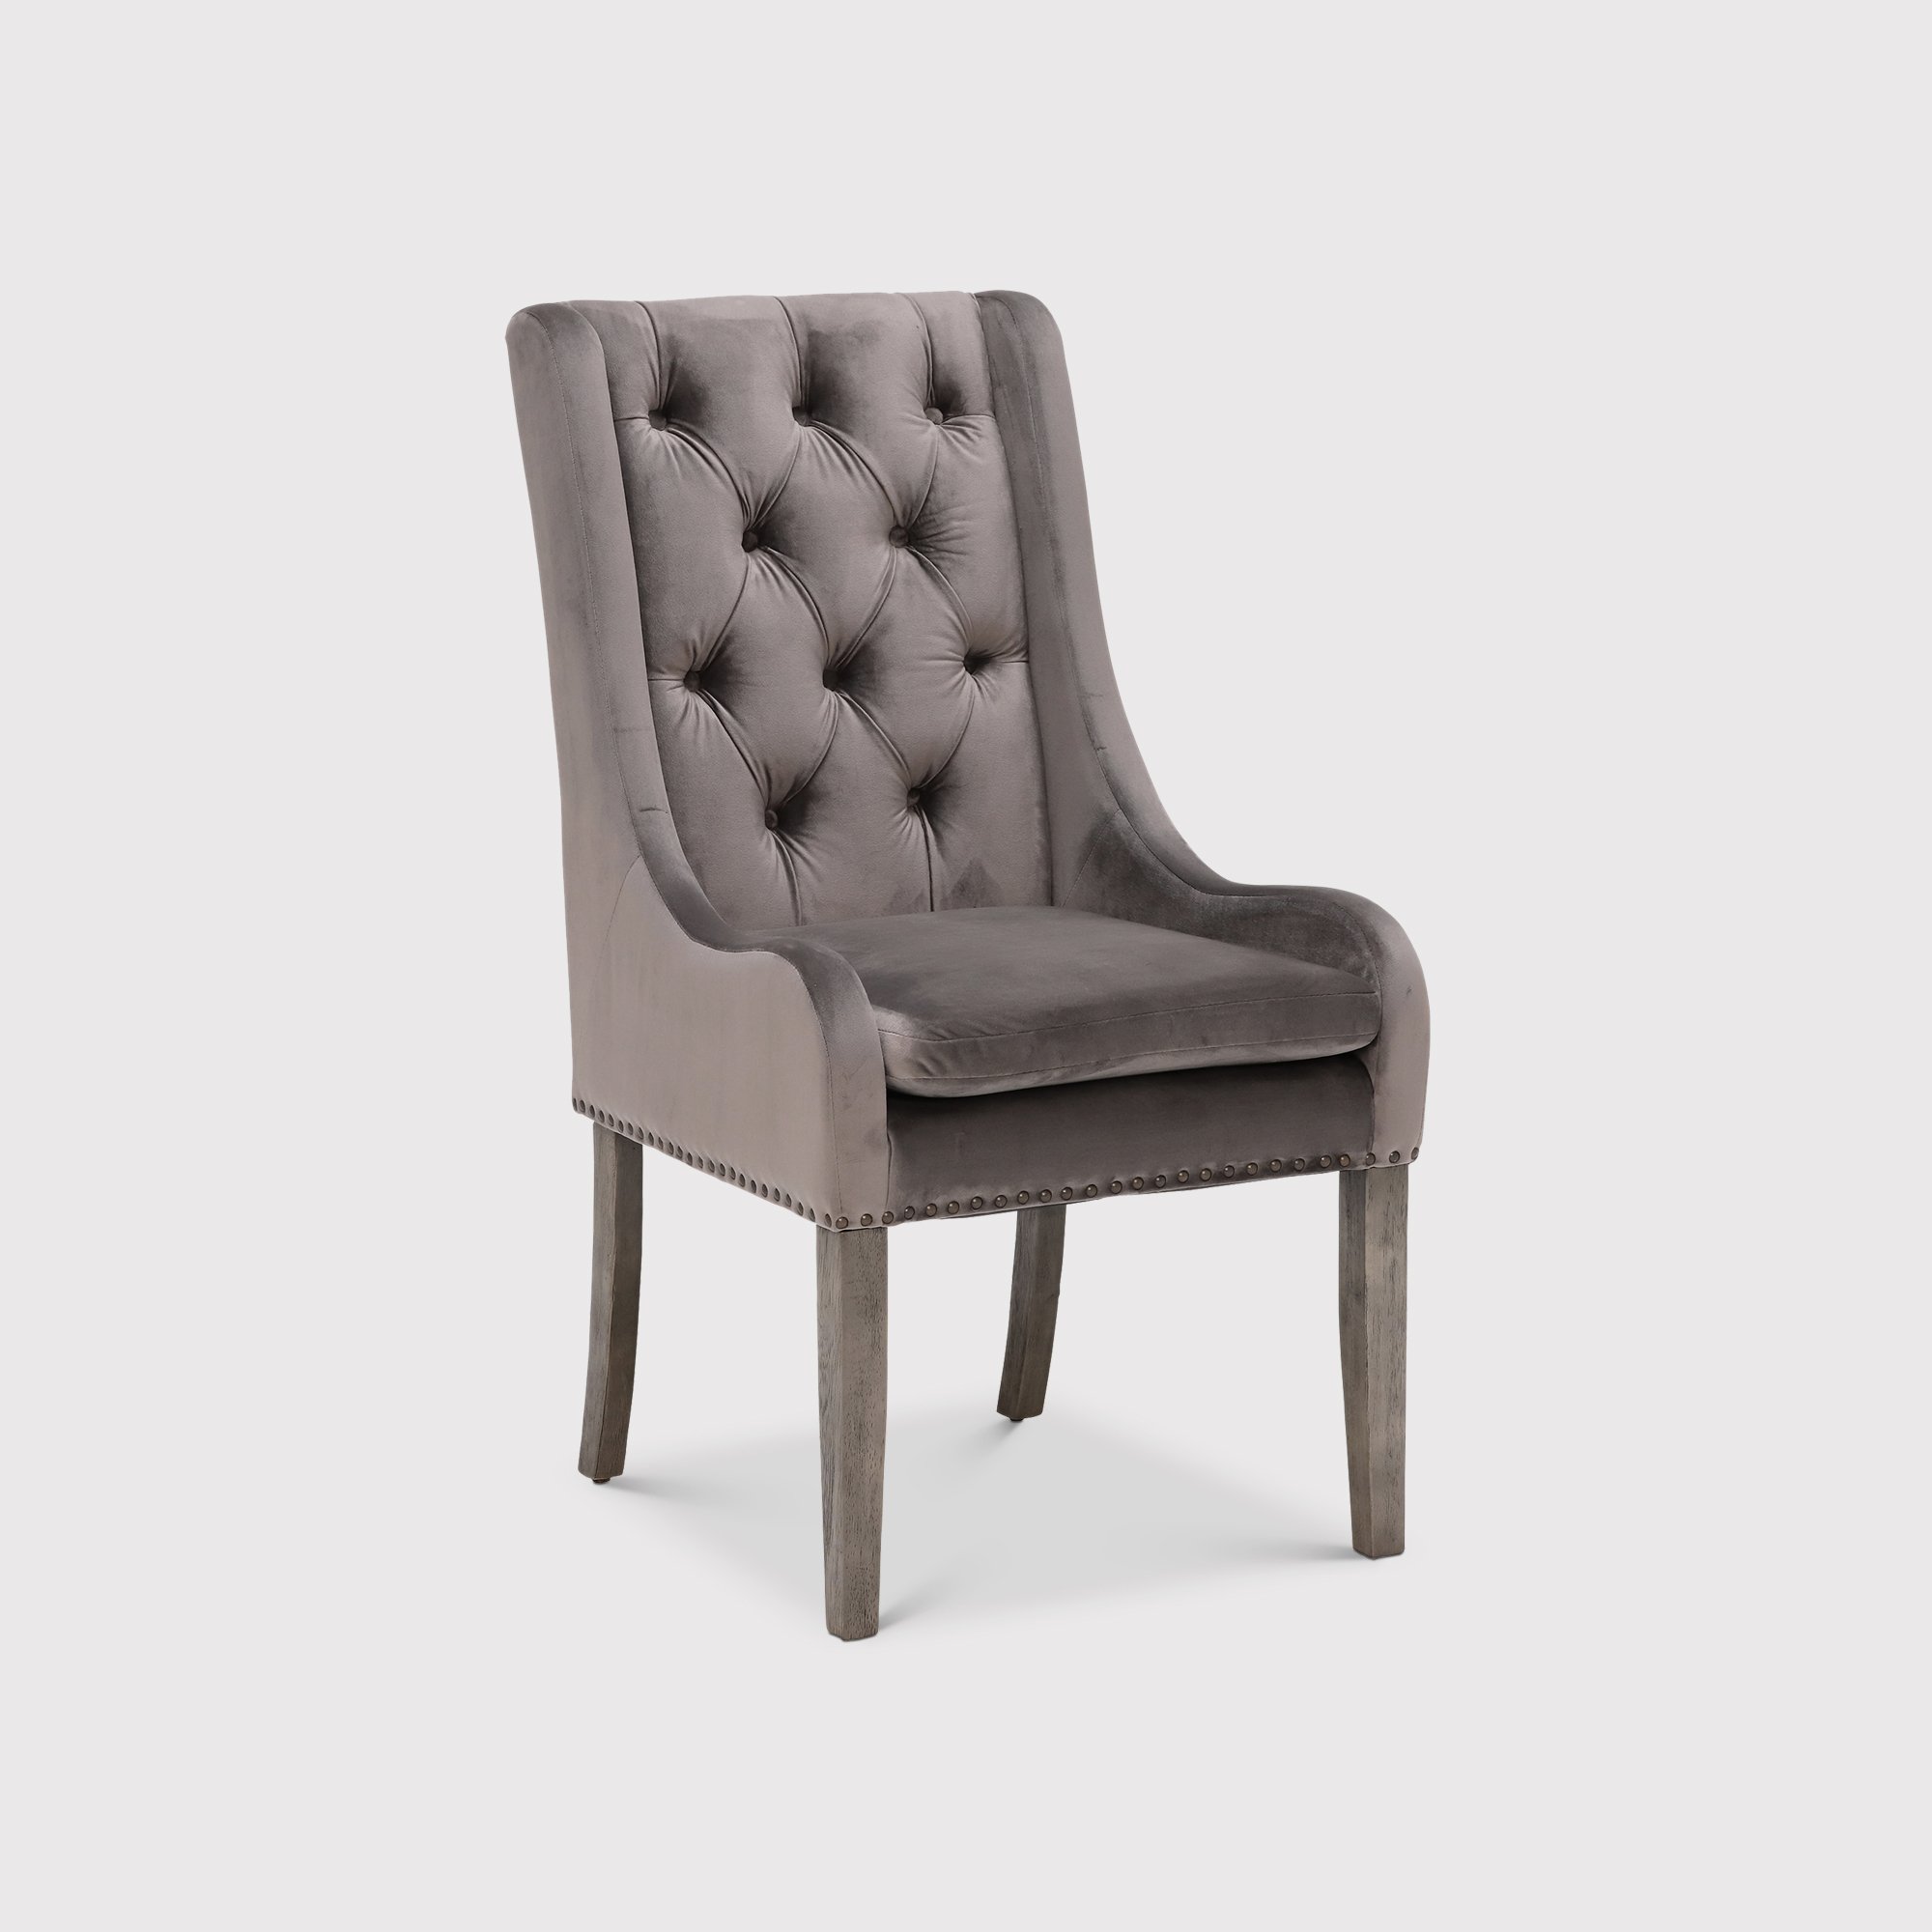 Ophelia Buttoned Back Dining Chair, Grey | Barker & Stonehouse